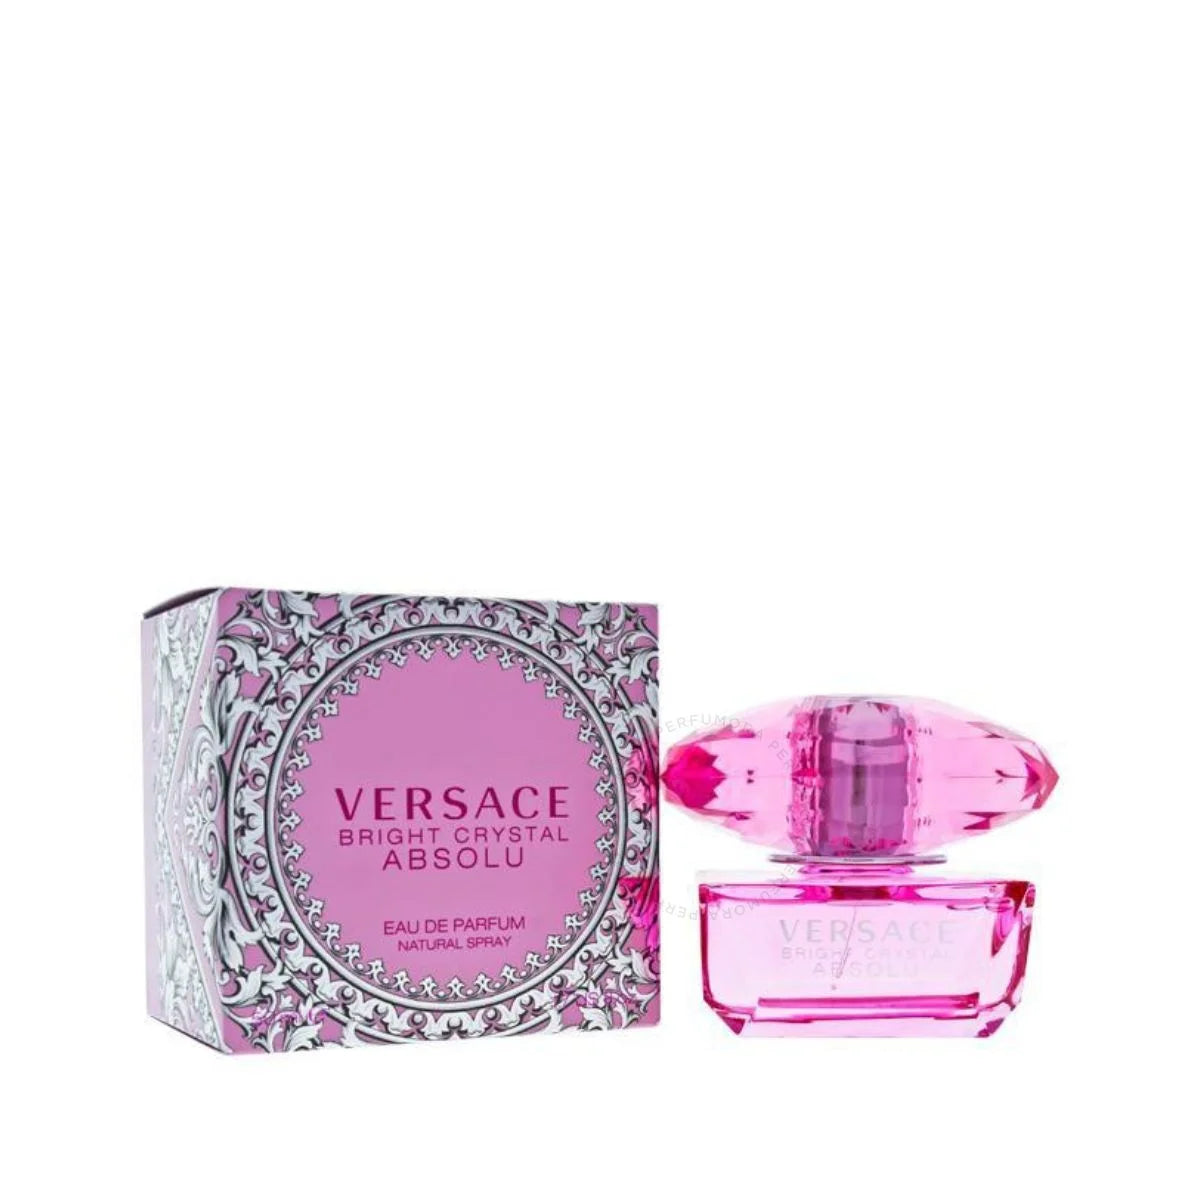 Bright Crystal Absolu by Versace for Women - EDP Spray